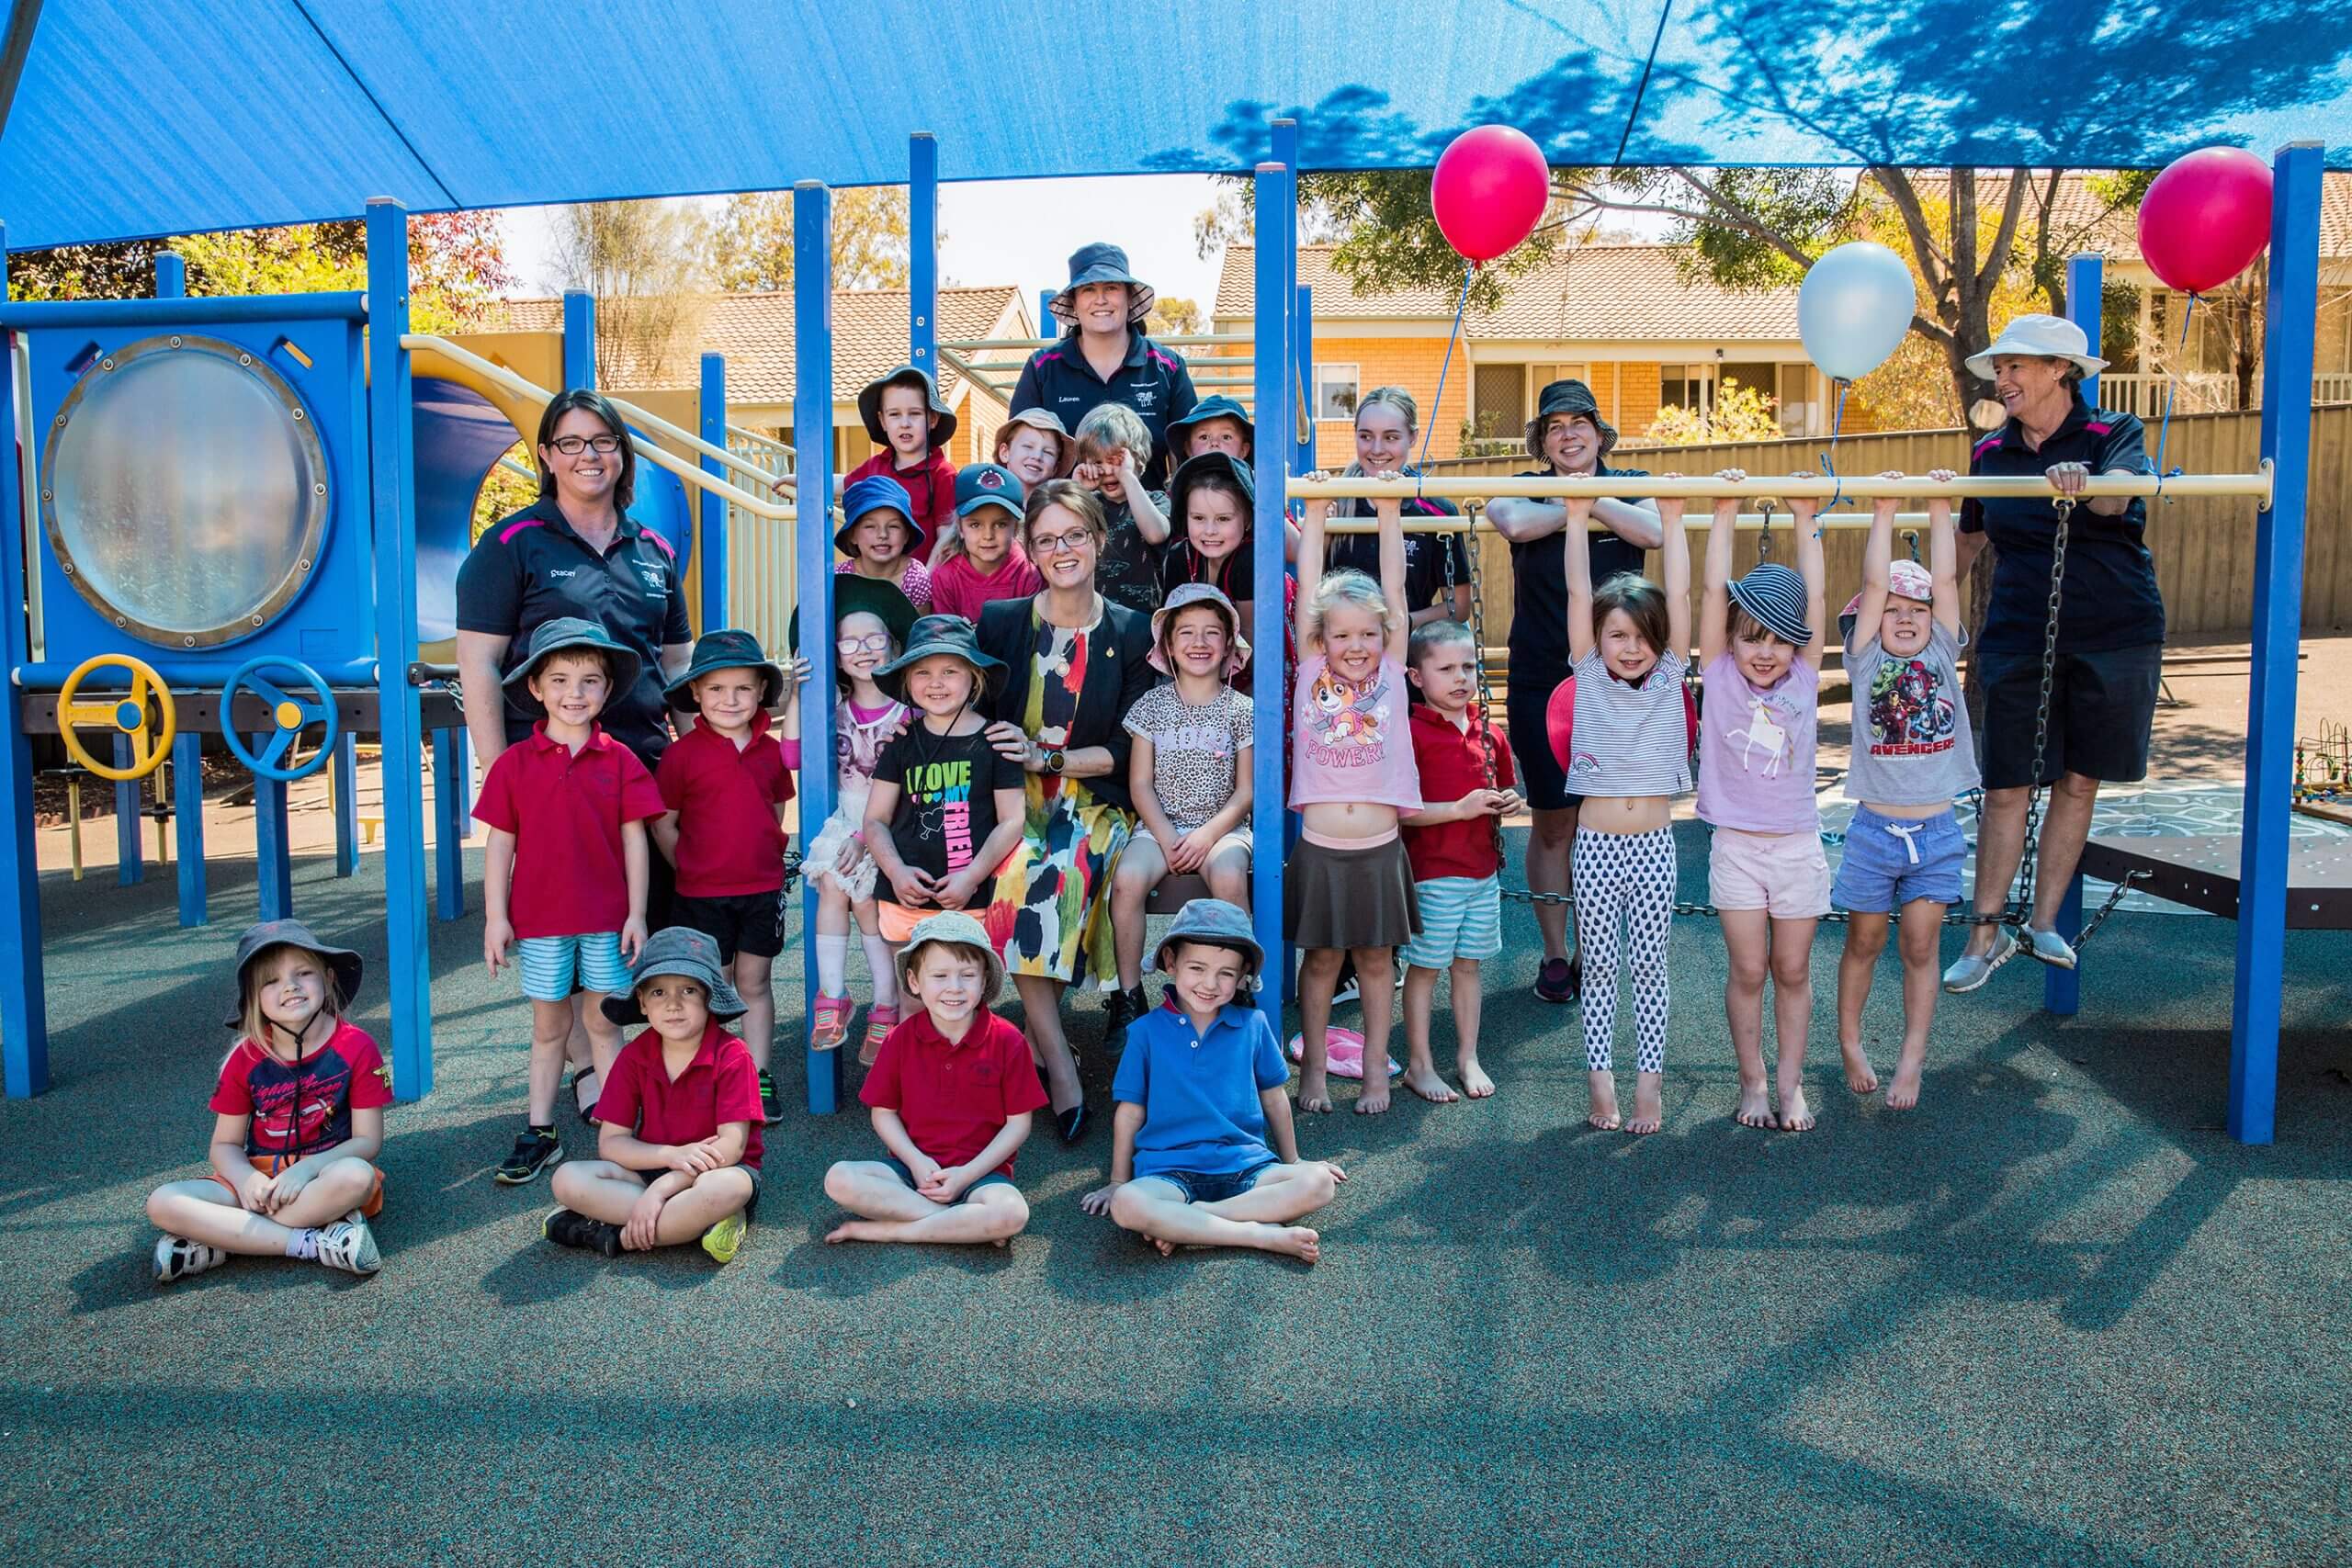 Member for Cootamundra Steph Cooke with a number of preschool students at Gundagai Preschool